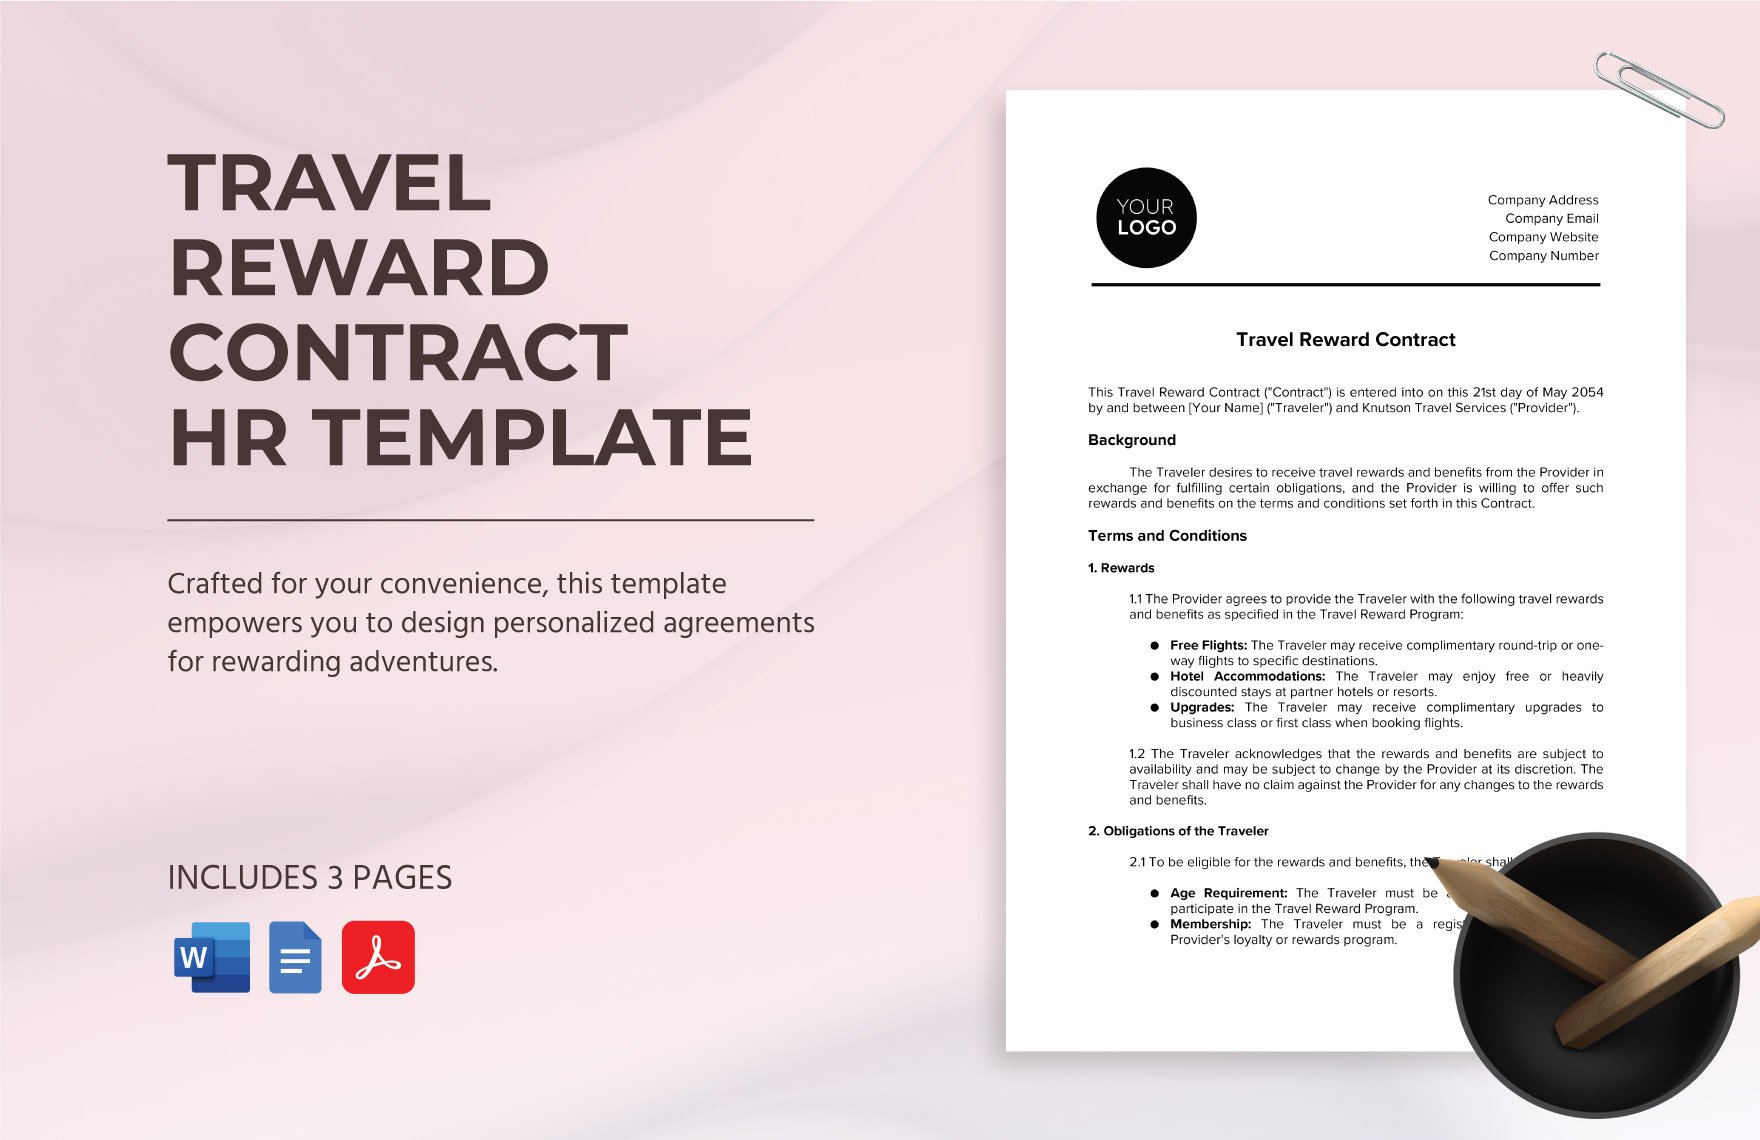 Travel Reward Contract HR Template in Word, Google Docs, PDF